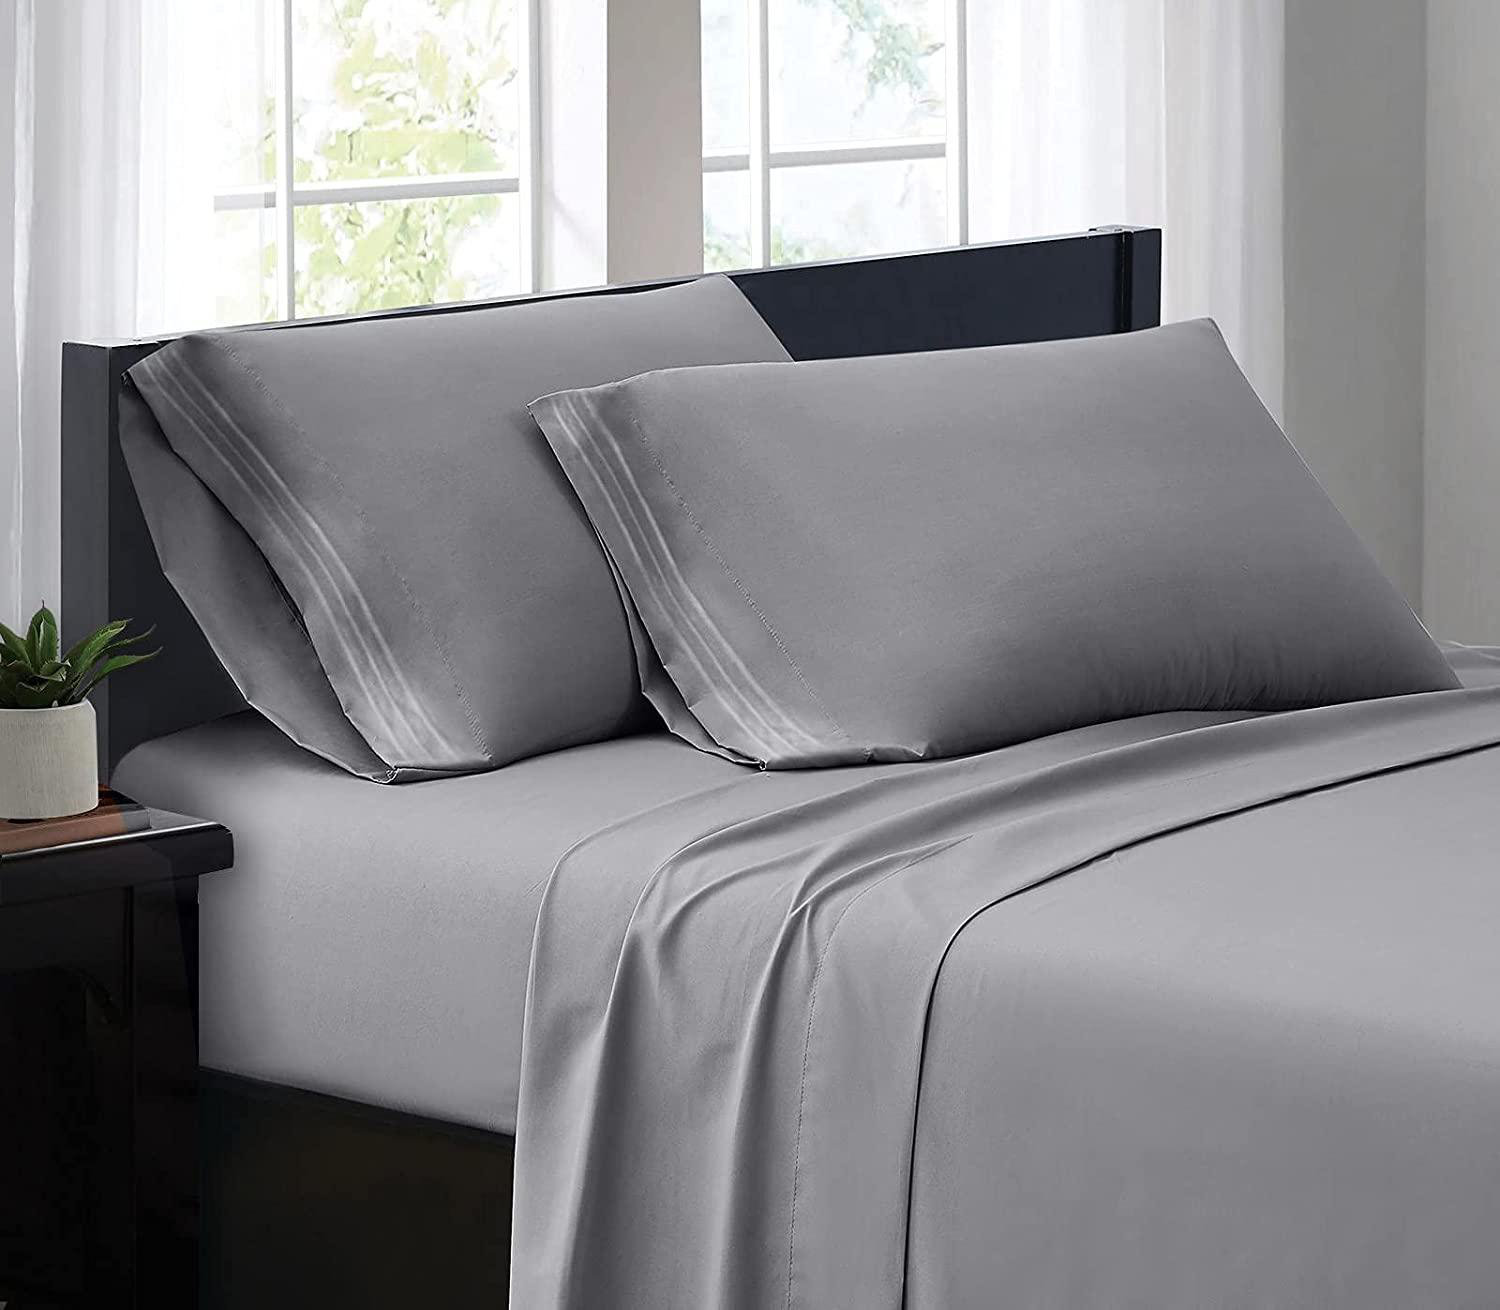 Deep Pocket 6 PC Sheet Set 1200 Thread Count Egyptian Cotton Full Size & Color